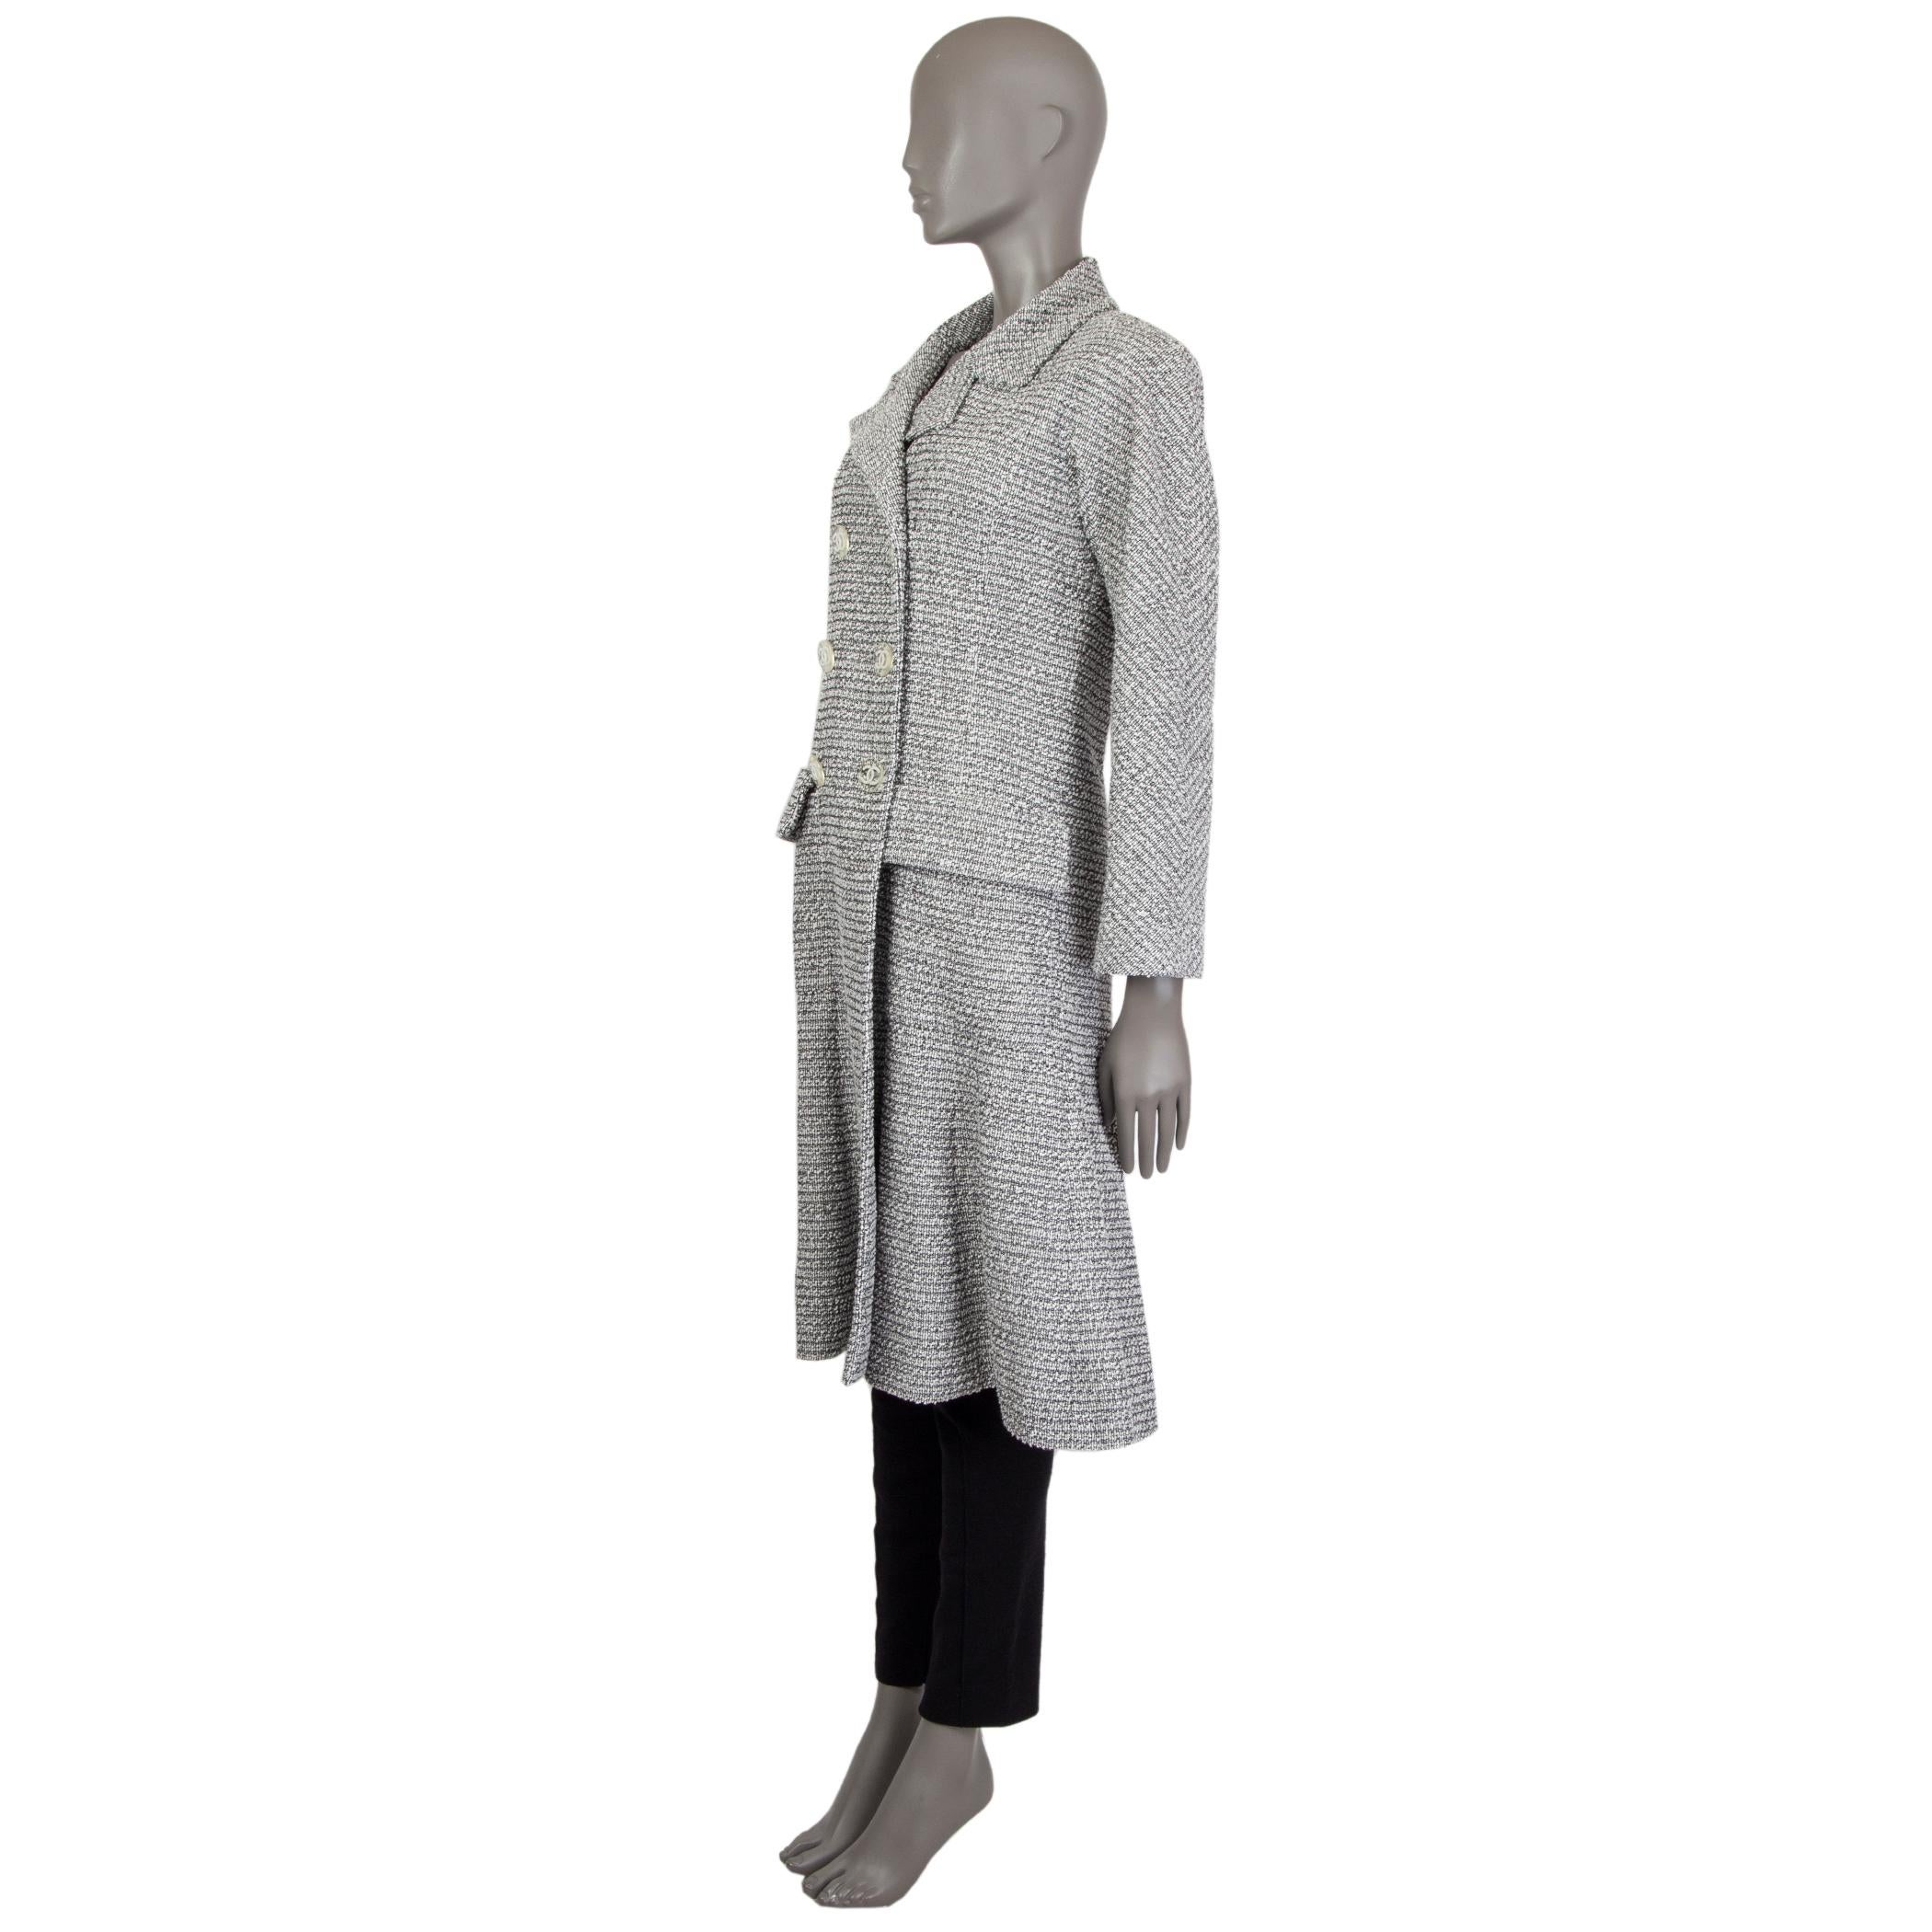 Chanel double-breasted tweed coat in black and white cotton (90%) and nylon (10%). With notch collar, two flap pockets on the sides, and peplum hemline. Closes with clear plastic and white CC buttons on the front. Lined in off-white camelia-print